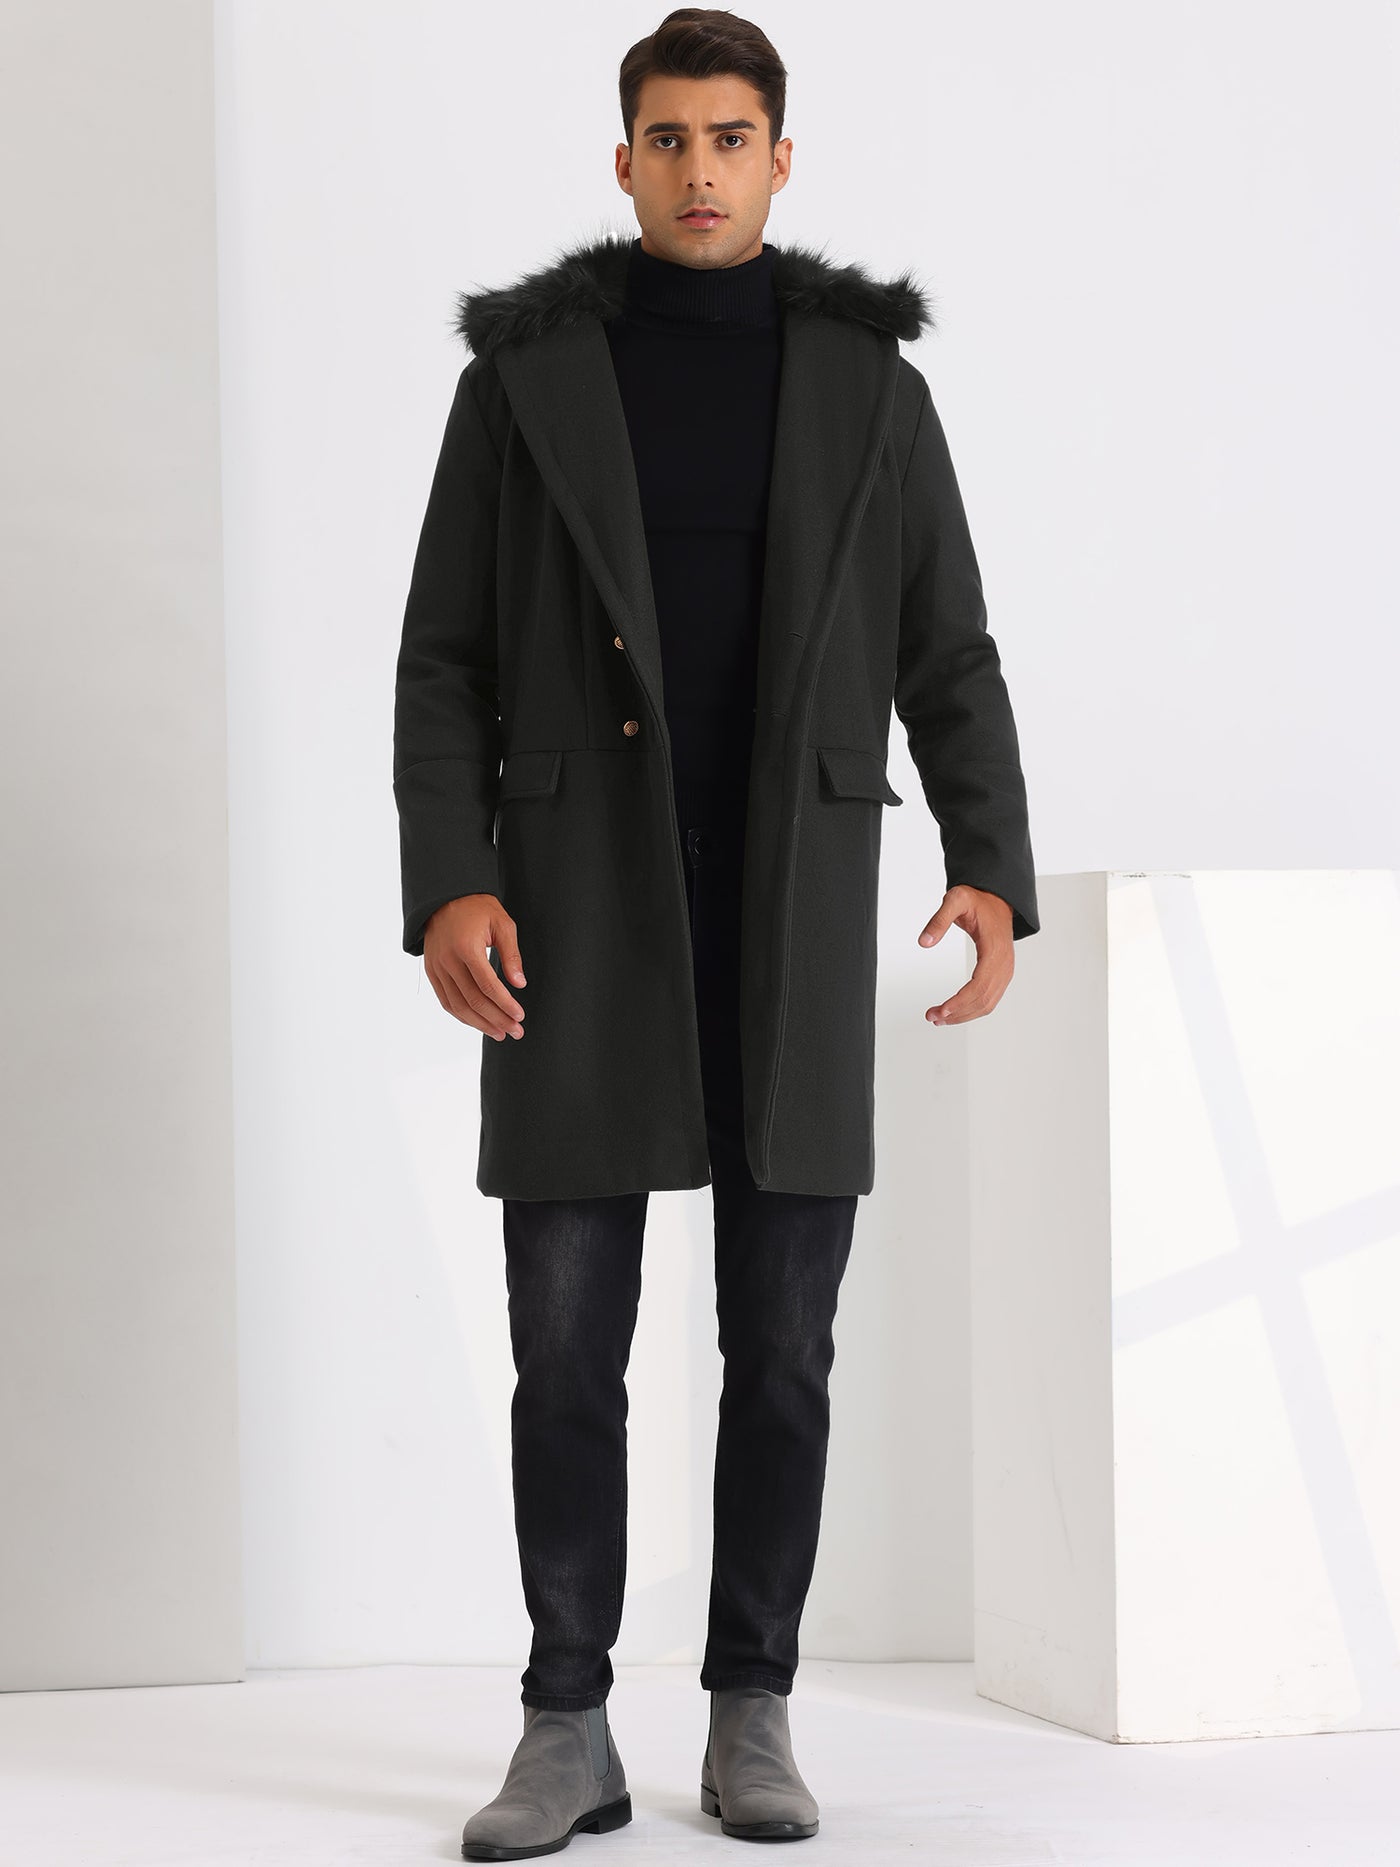 Bublédon Winter Overcoat for Men's Double Breasted with Detachable Faux Fur Collar Trench Coat